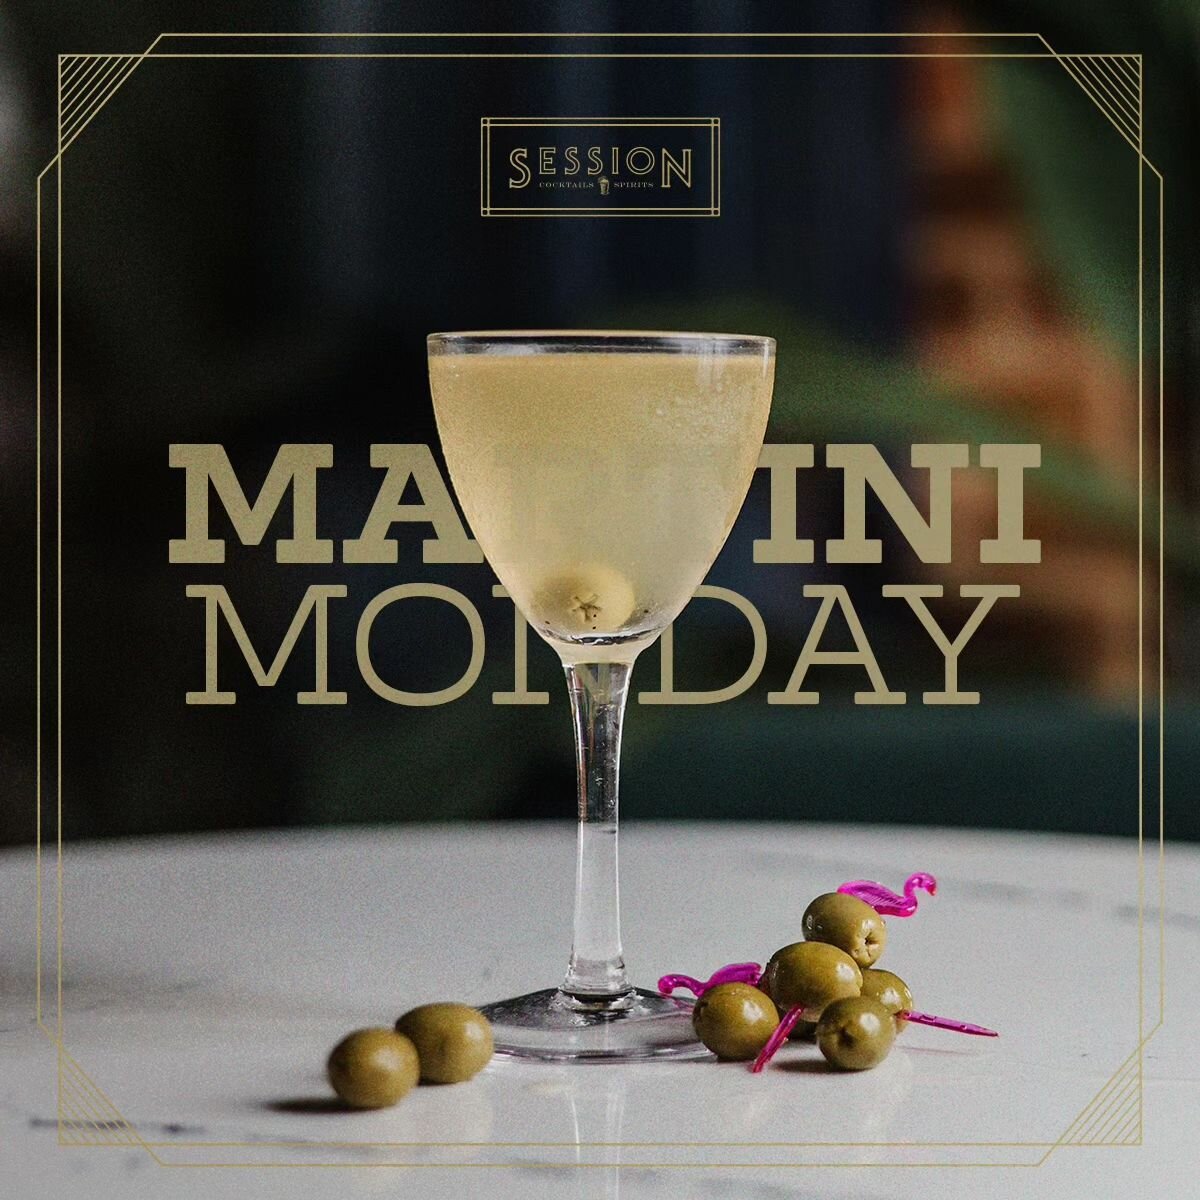 It's Monday, and it's time to get dirty. A dirty martini that is. Come join us for Martini Monday specials all day long! Not to mention happy hour 4-6pm